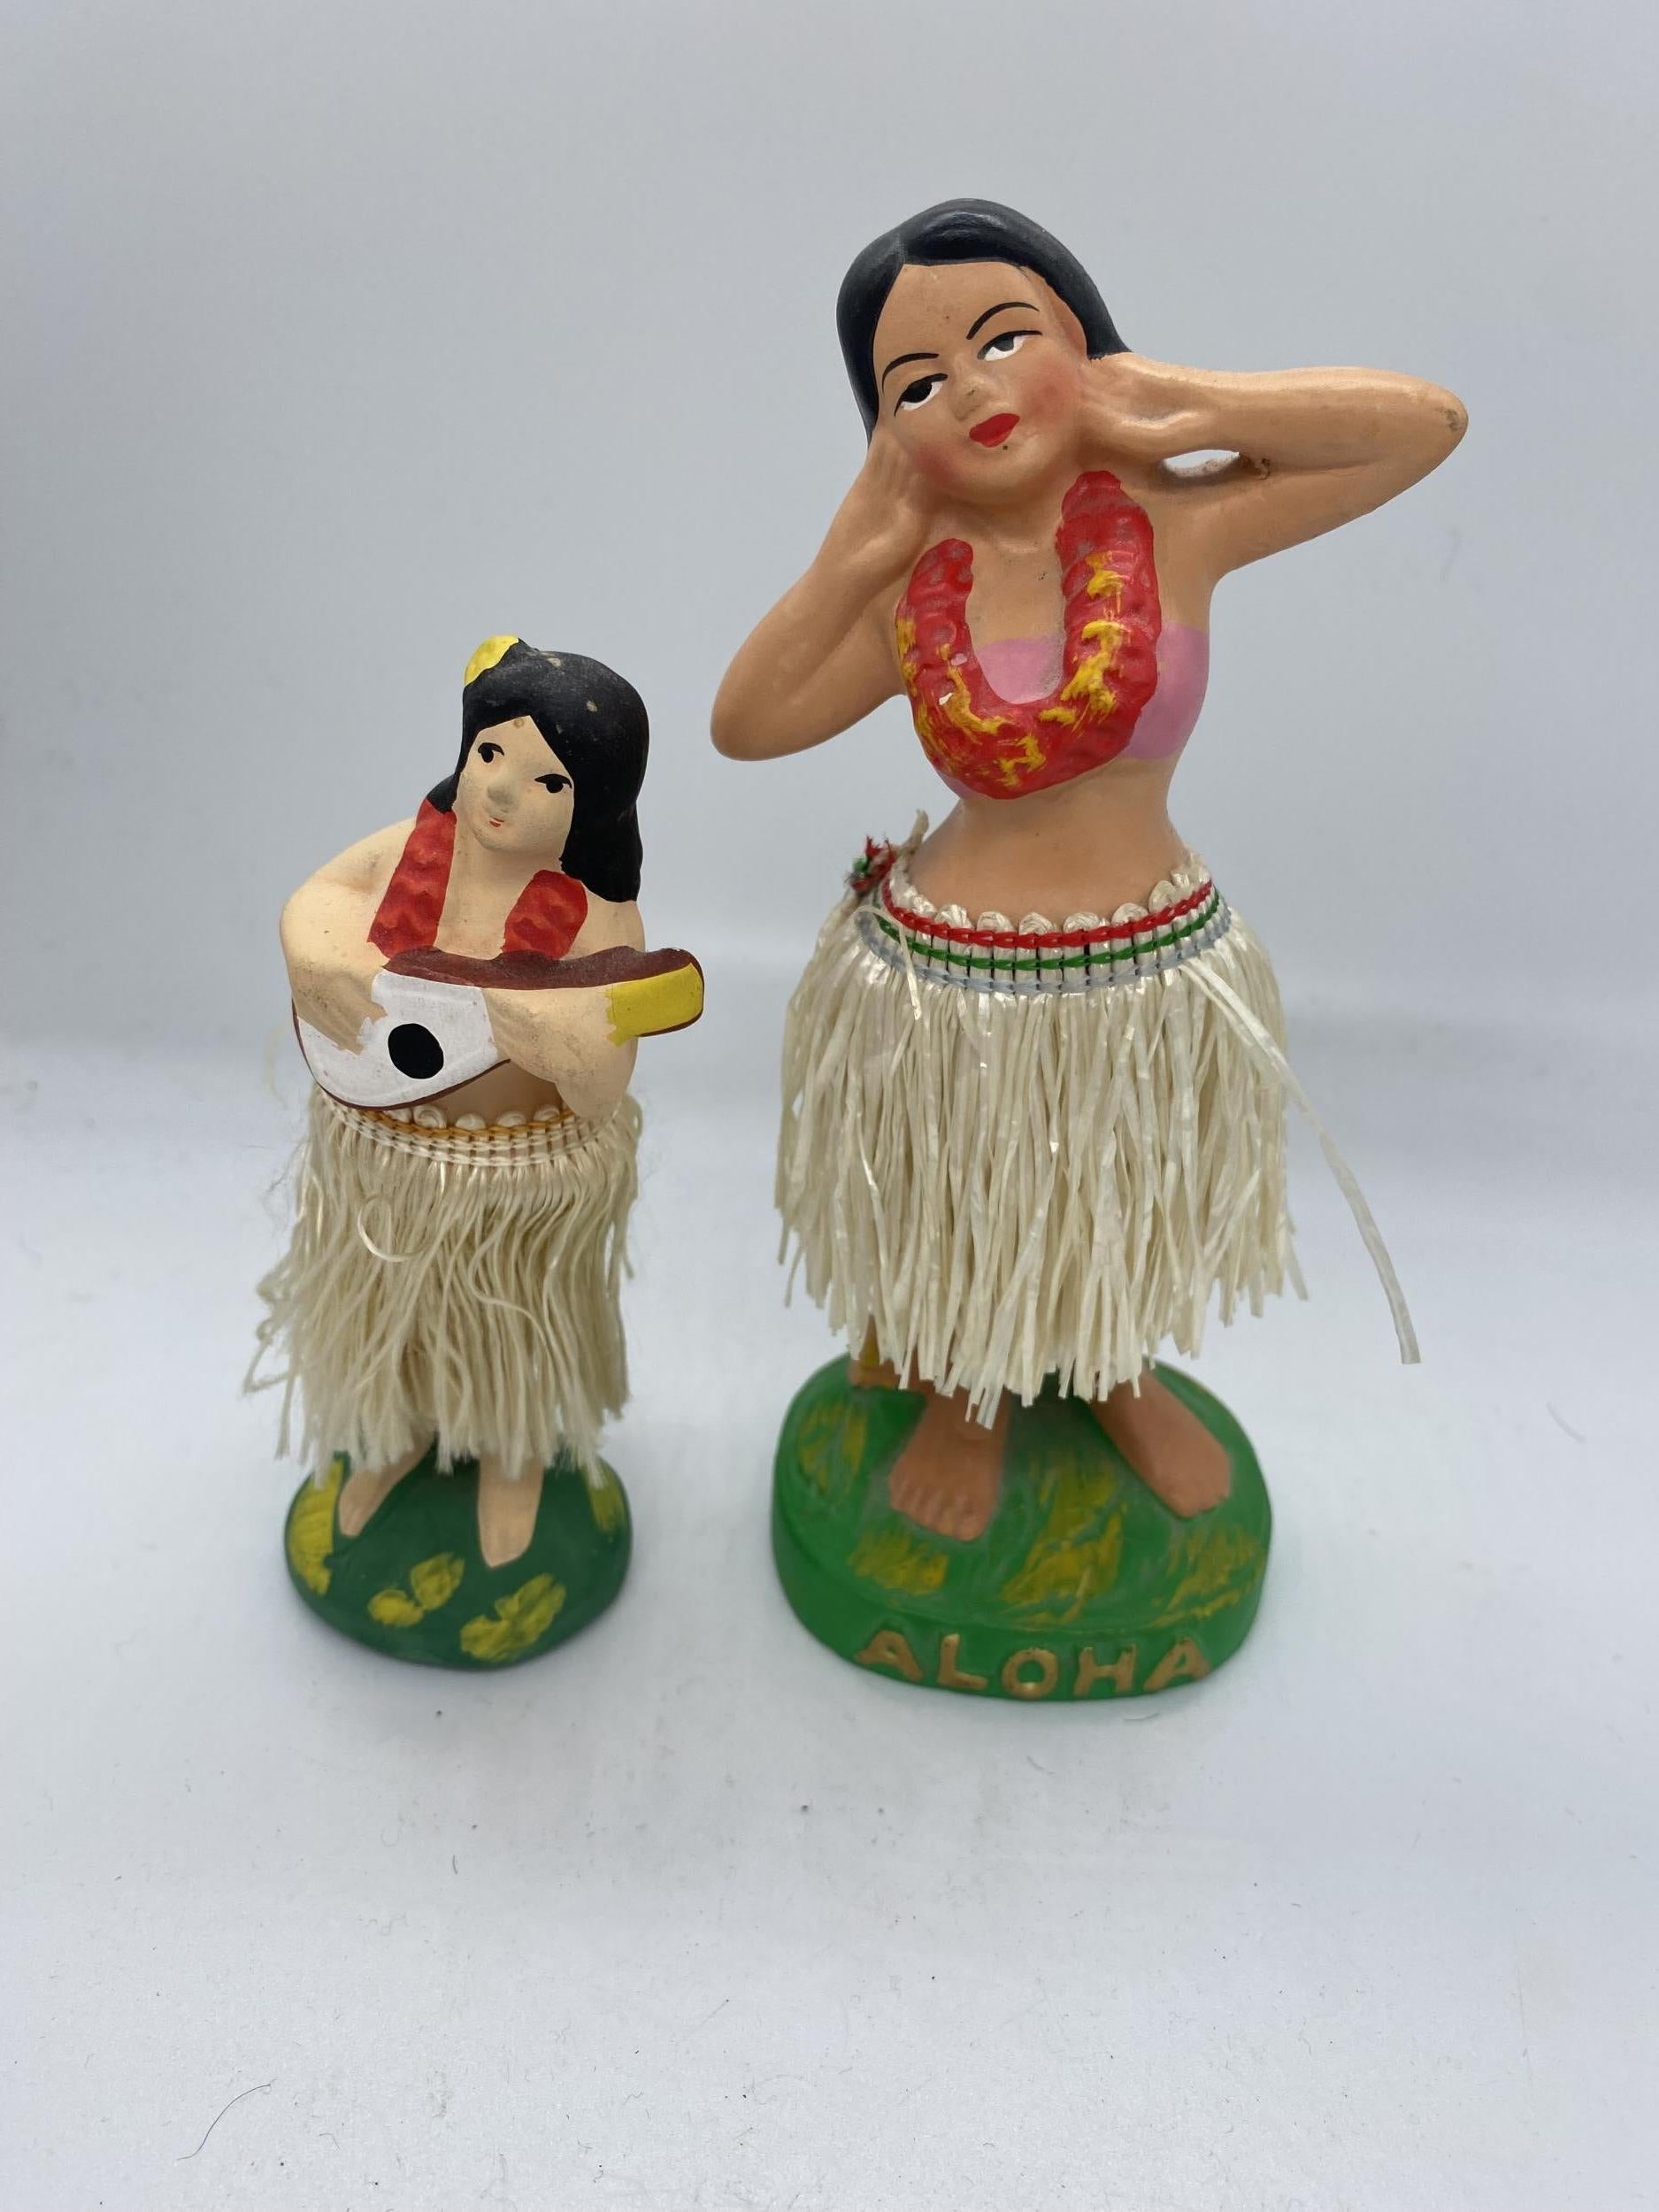 Ever since Hawaii became a popular tourist attraction in the early 1900s, the Hula Girl has been a symbol of the state of islands. Visitors loved to collect the Hula Girl Doll and bring her home as a souvenir or gift for friends and family.
During